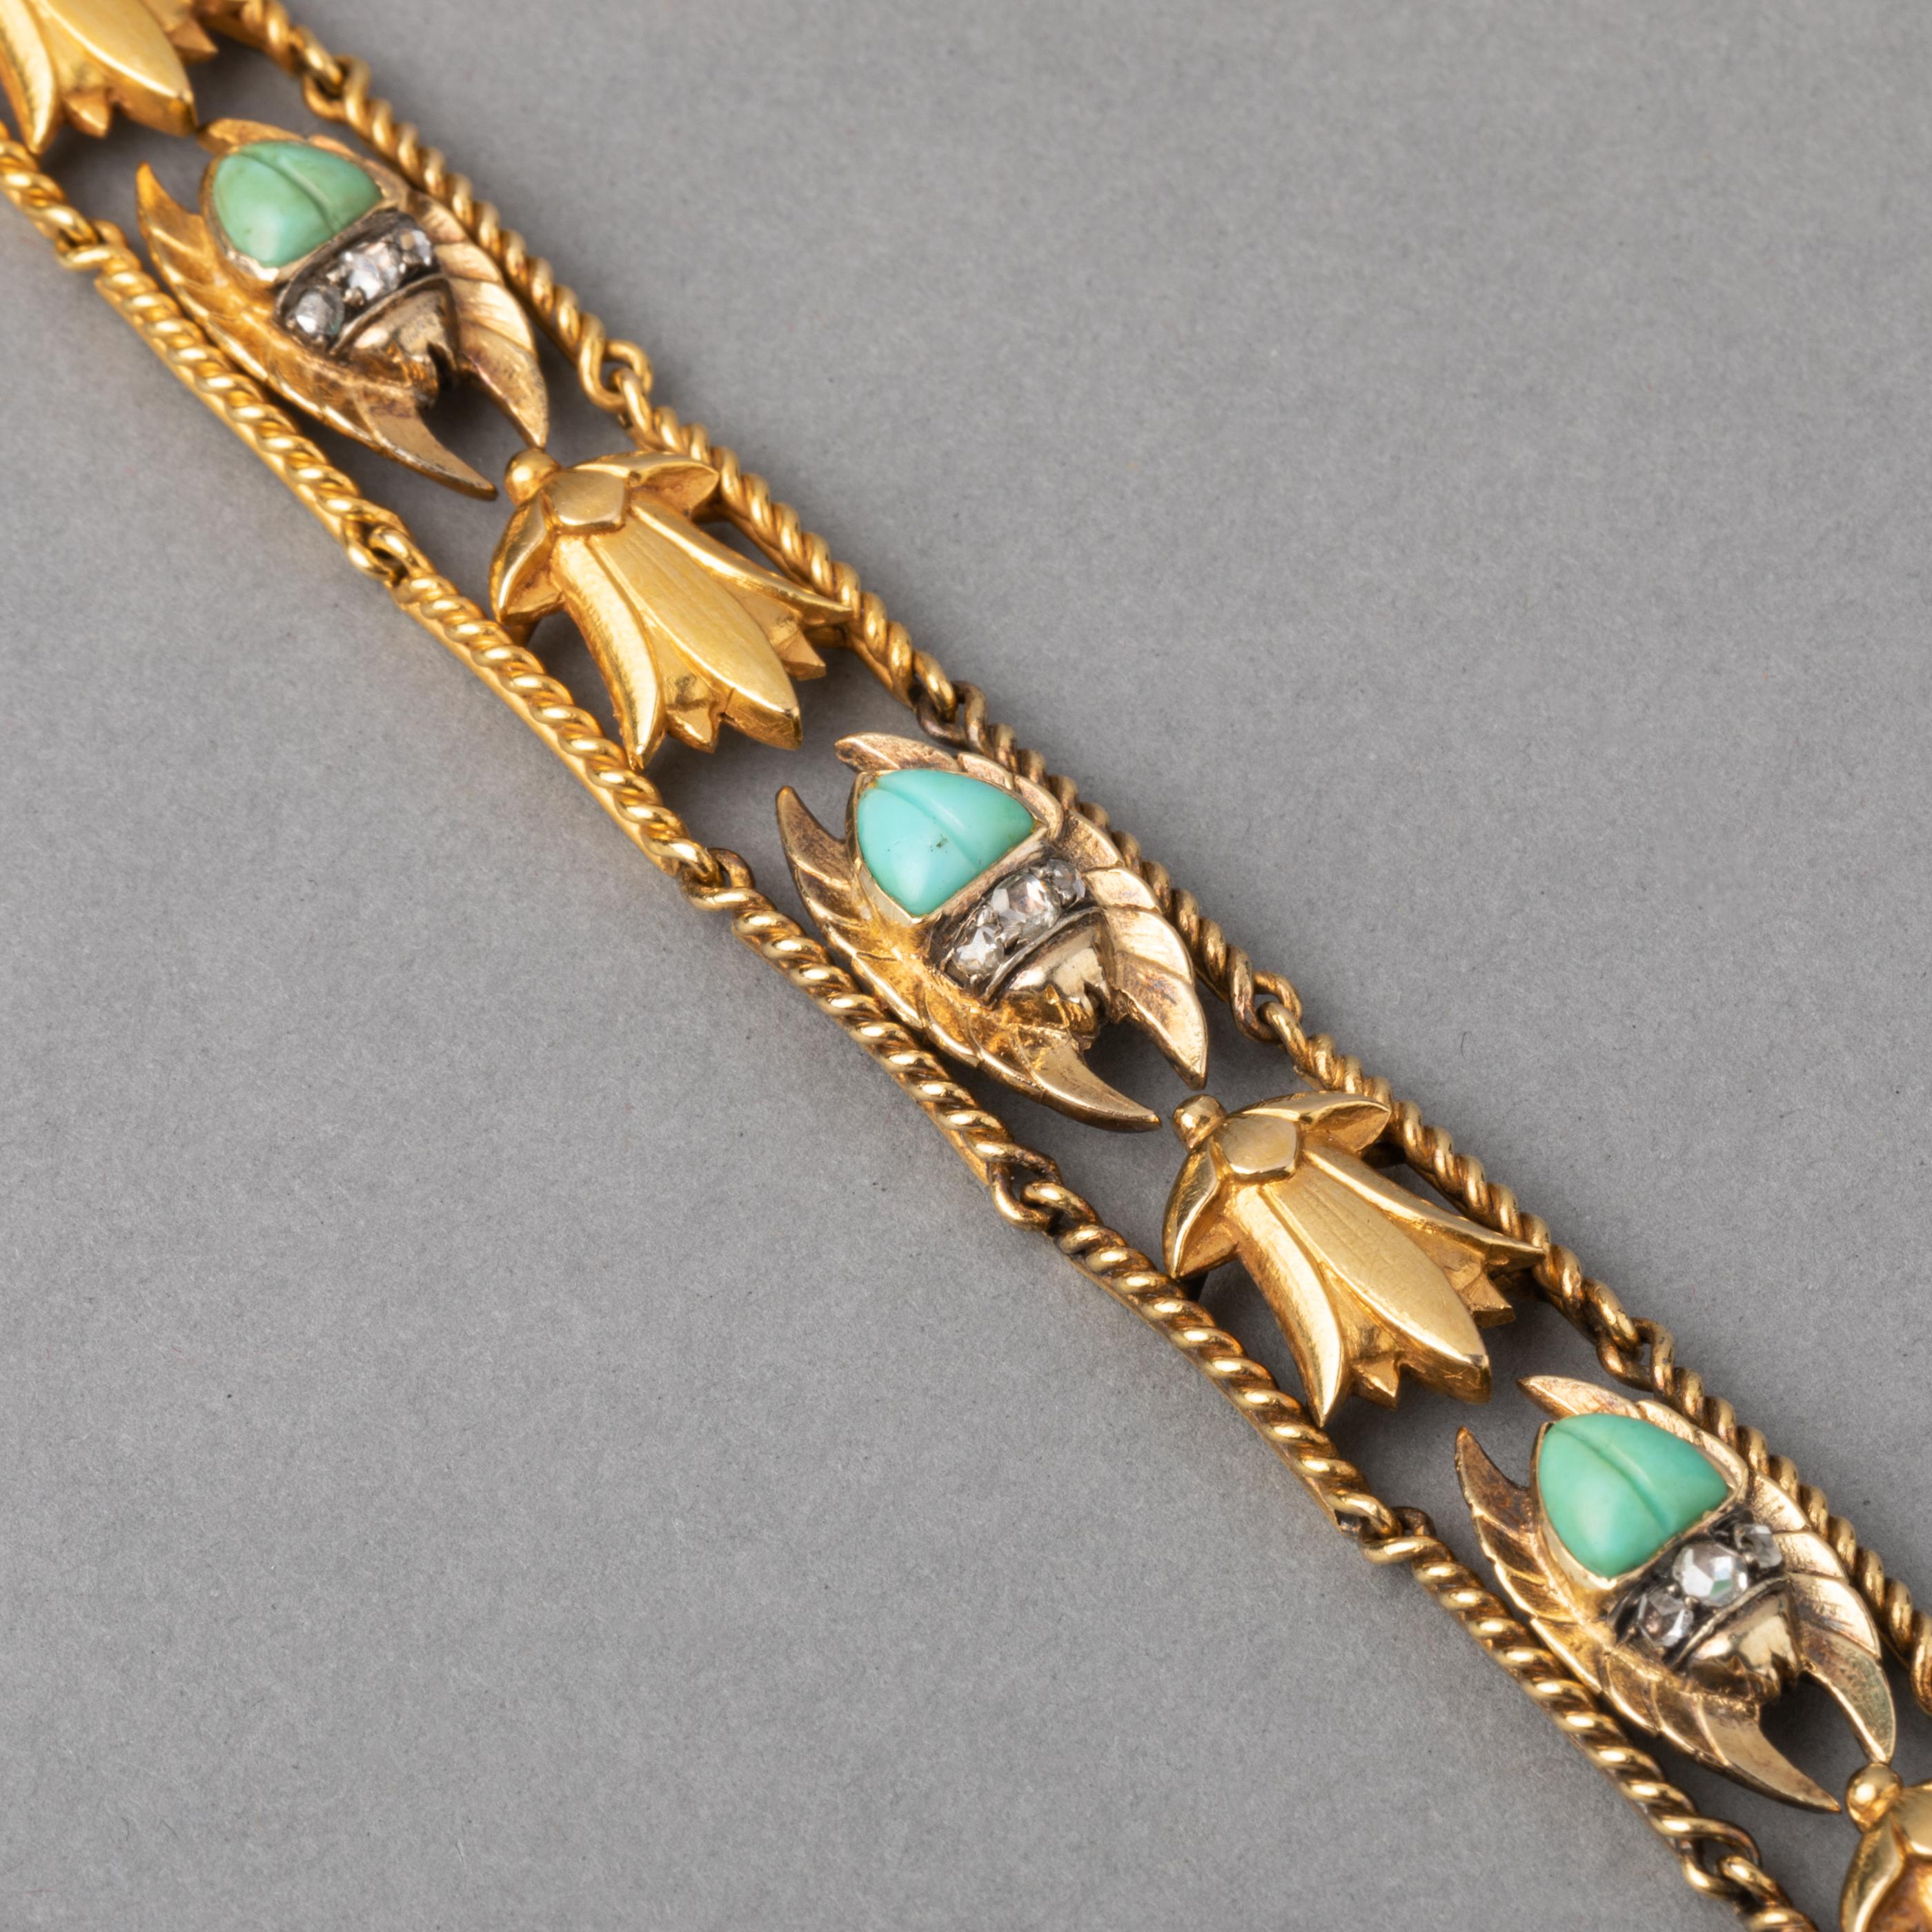 Gold and Turquoises Antique French Egyptian Revival Bracelet For Sale 3